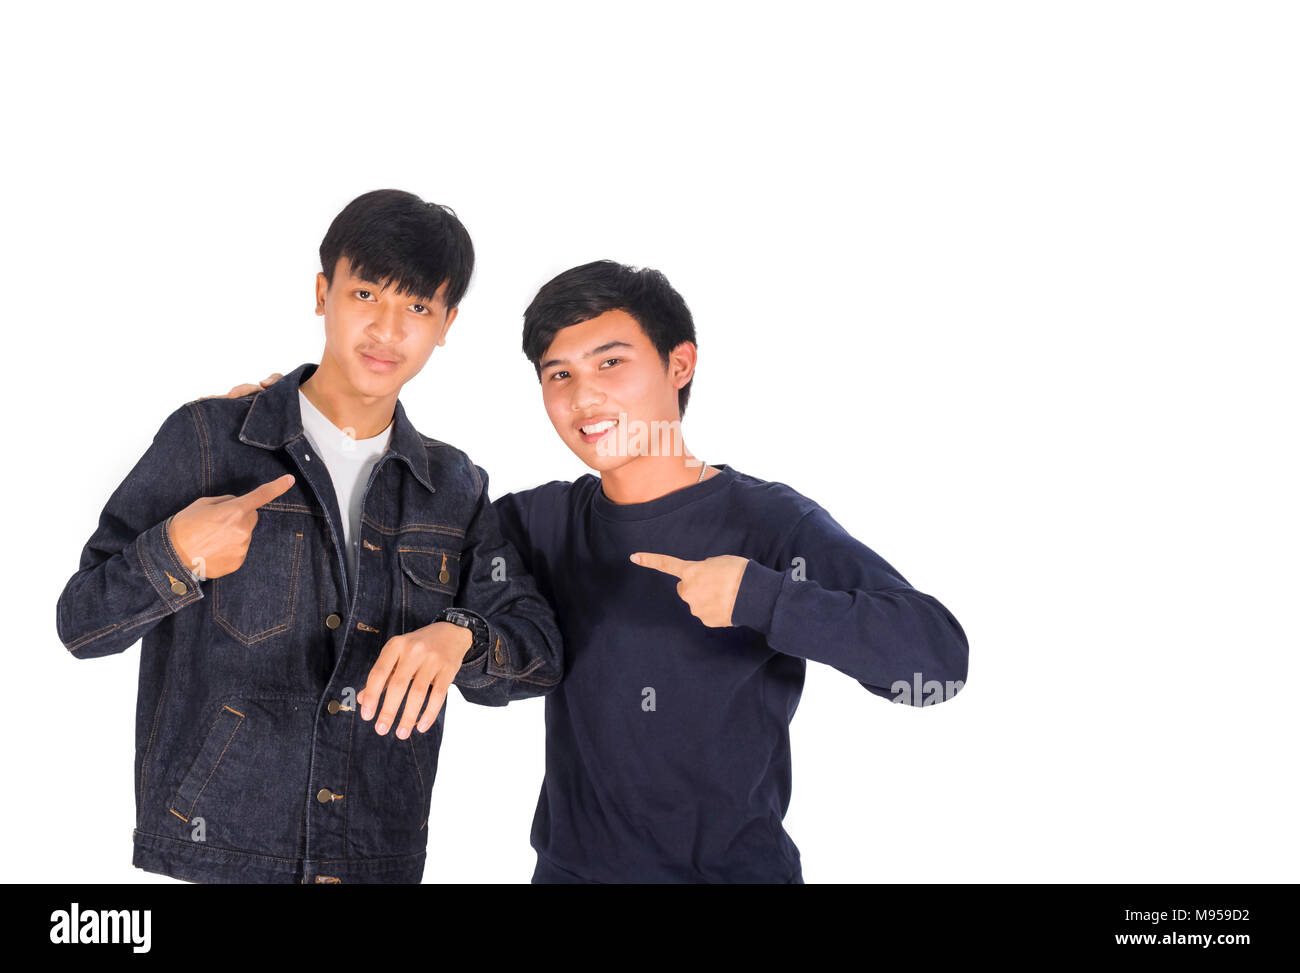 Two Asian boys are pointing to themselves white background. Stock Photo